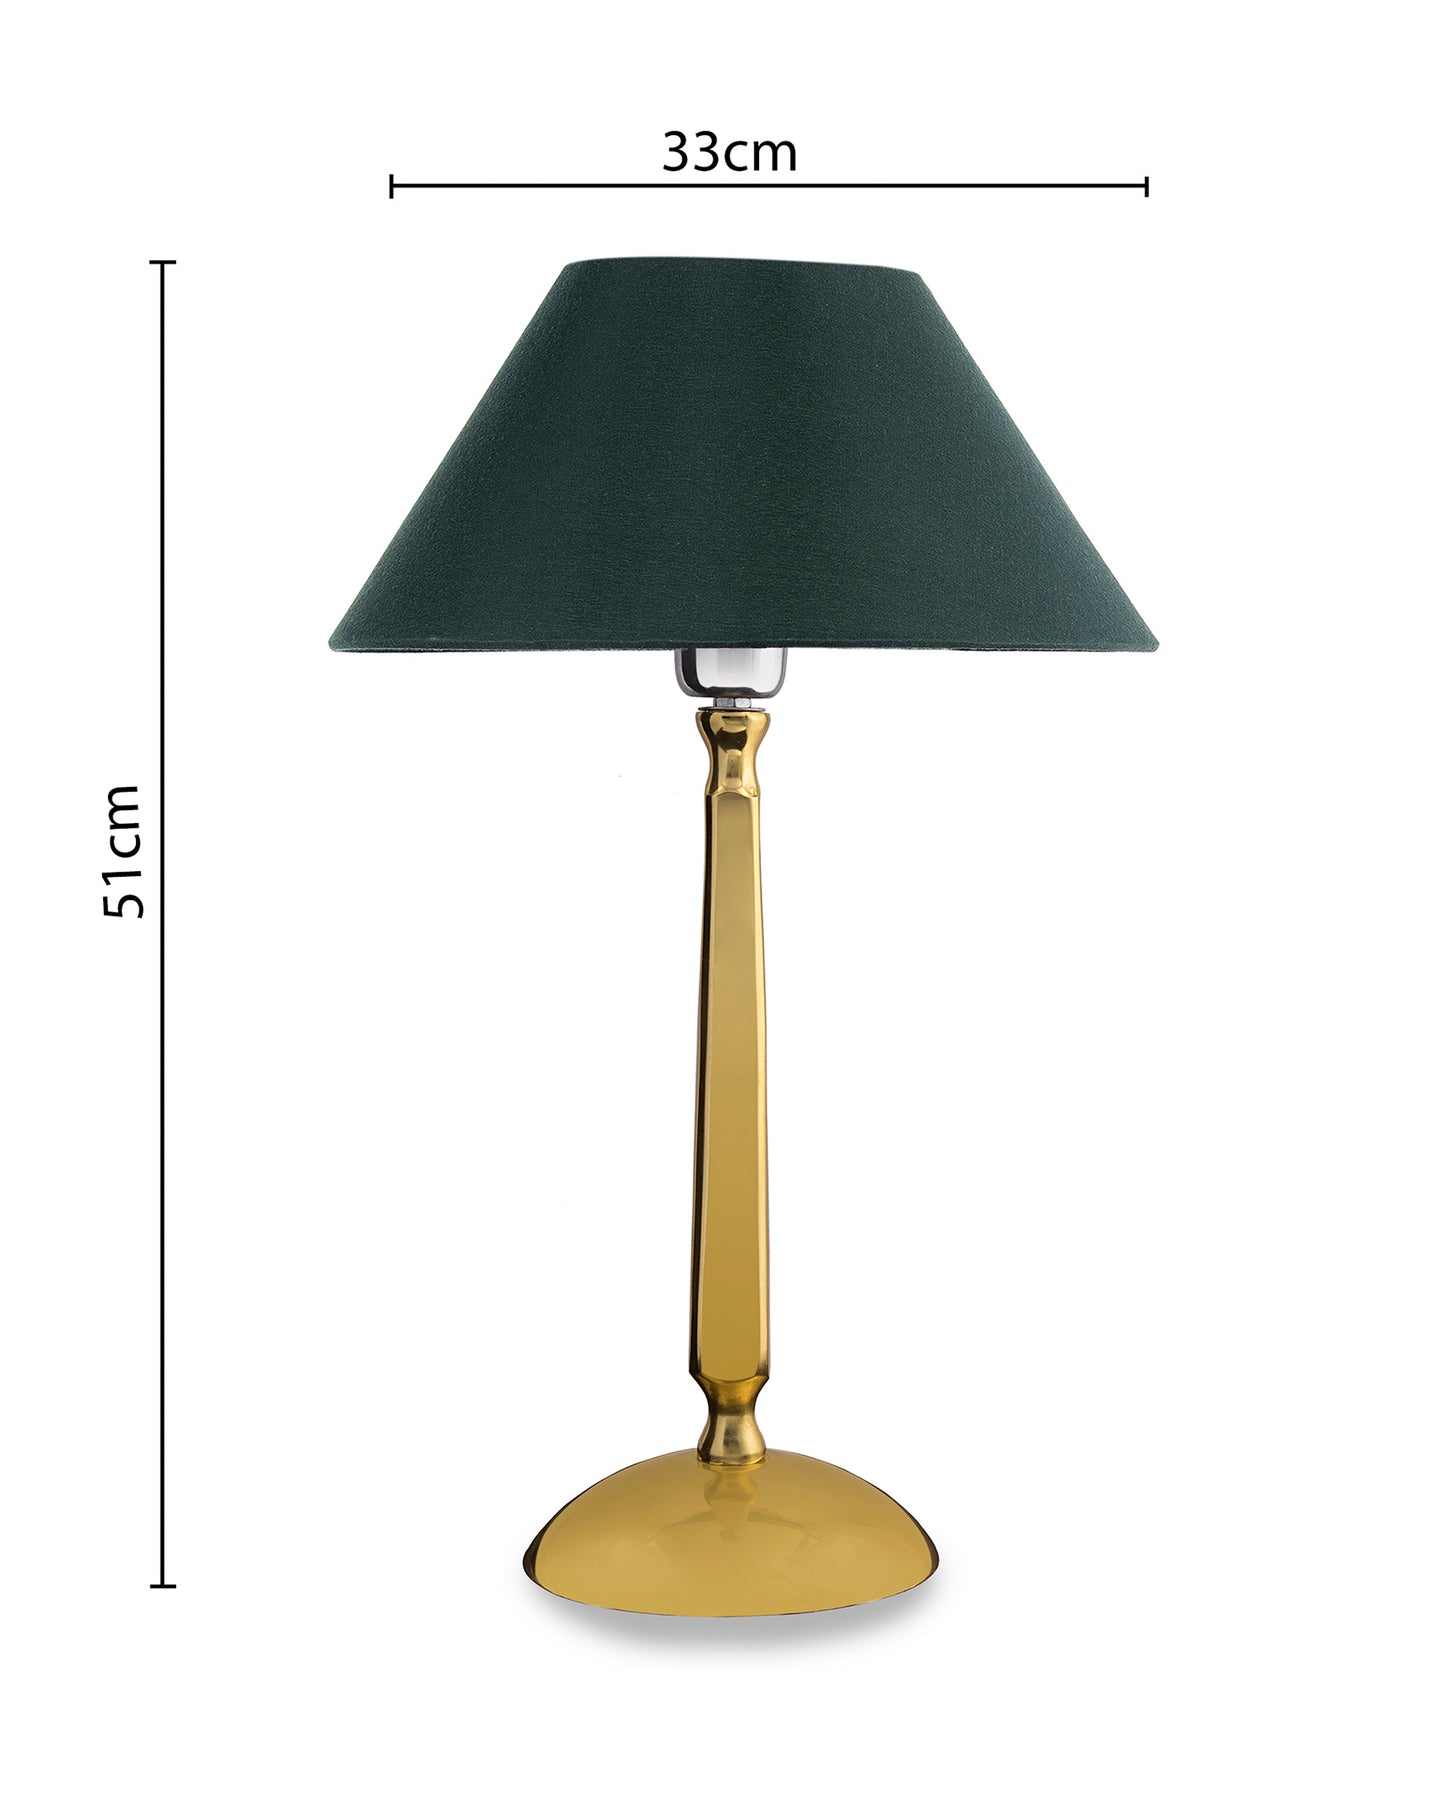 Classic Cubist Gold Brushed Lamp With Shade